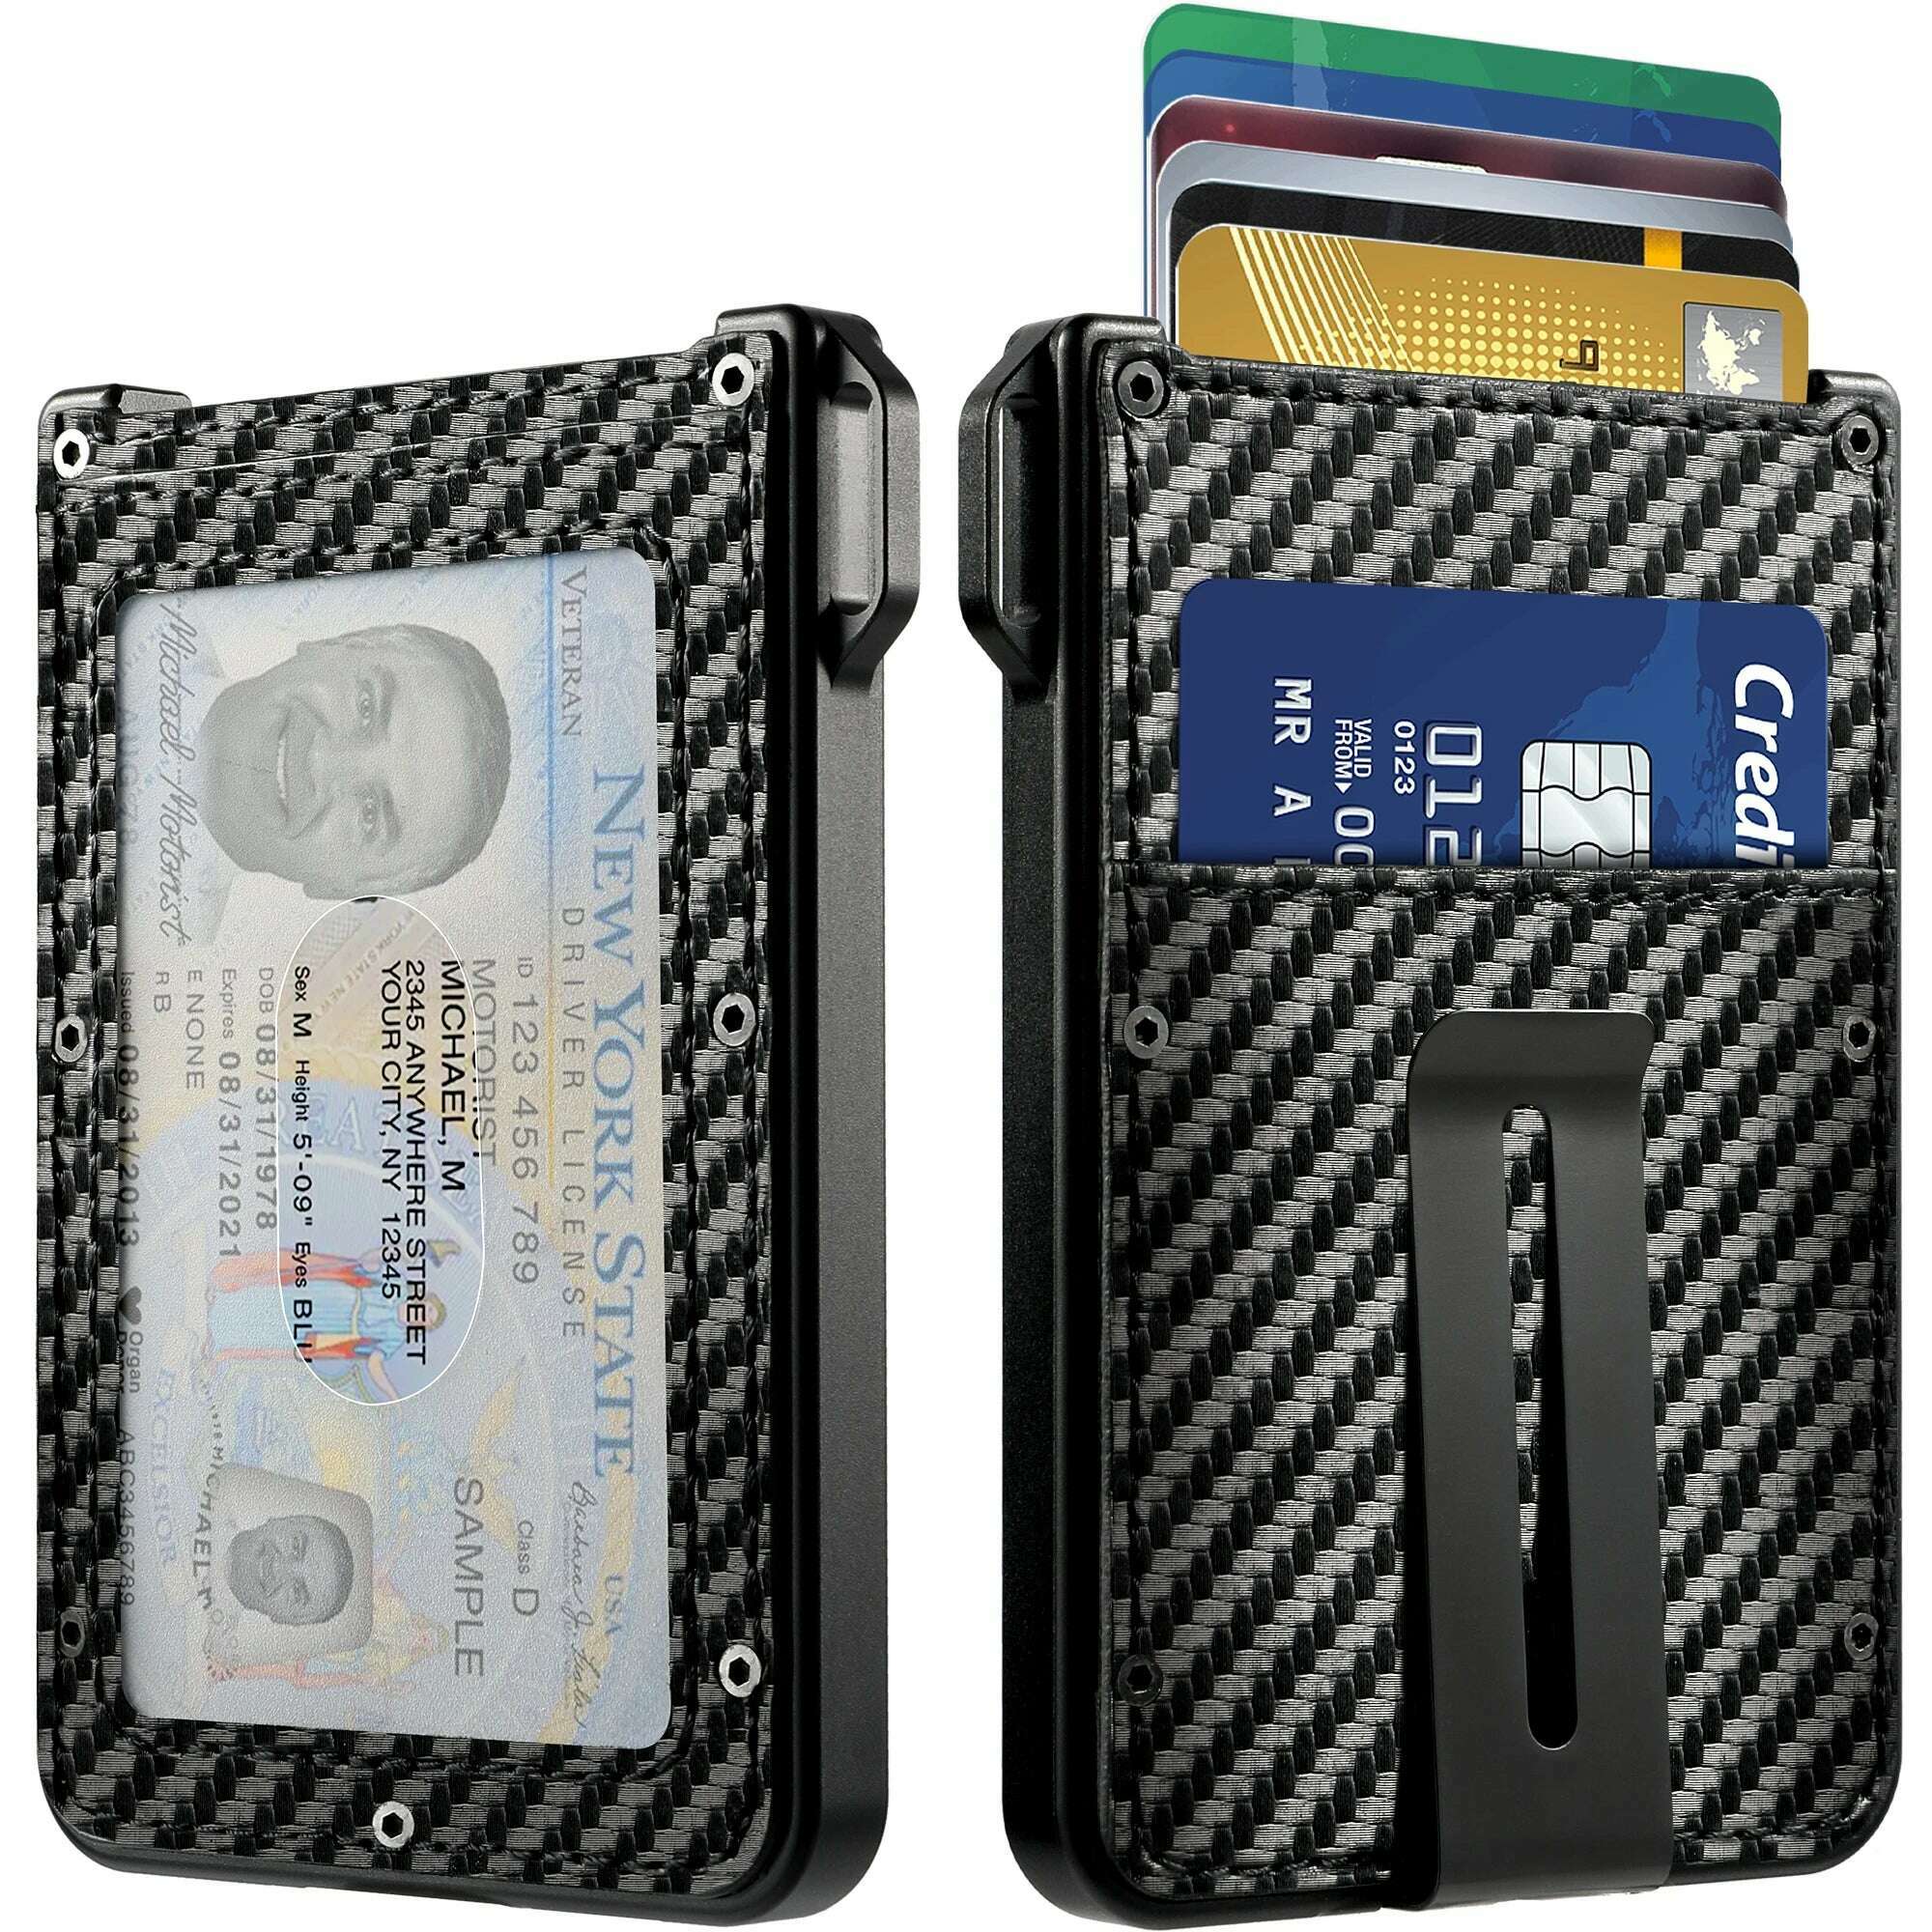 KIMLUD, Wallet For Men - Aluminum Slim Carbon Fiber Leather Wallet，Holds up 10 Cards Card Holder with Clear ID Card Holder, Cash Clip, Default Title, KIMLUD Womens Clothes